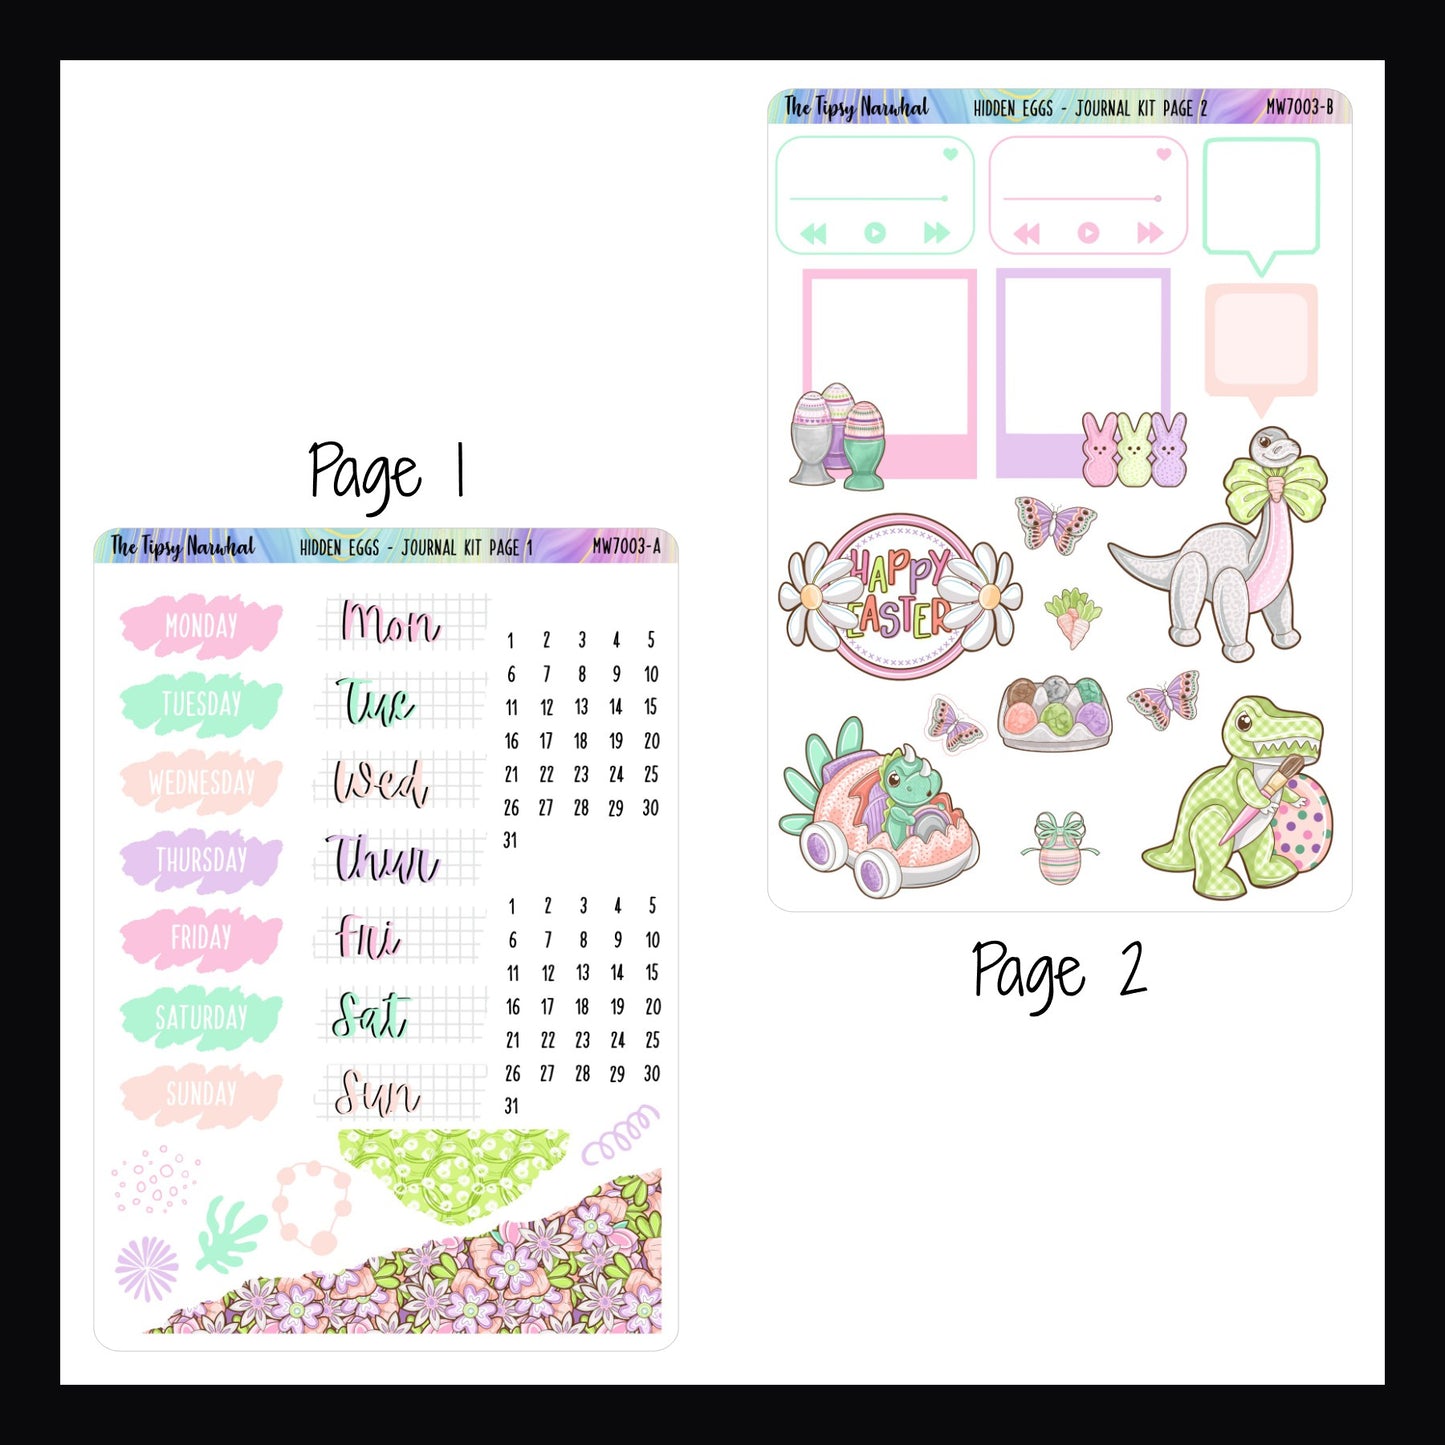 Hidden Eggs Journal Kit Pages 1 and 2.  Page 1 features date covers, scribble stickers and a pair of stickers with a ripped paper look.  Page 2 features decor focused stickers, playlist stickers and photo frame stickers.